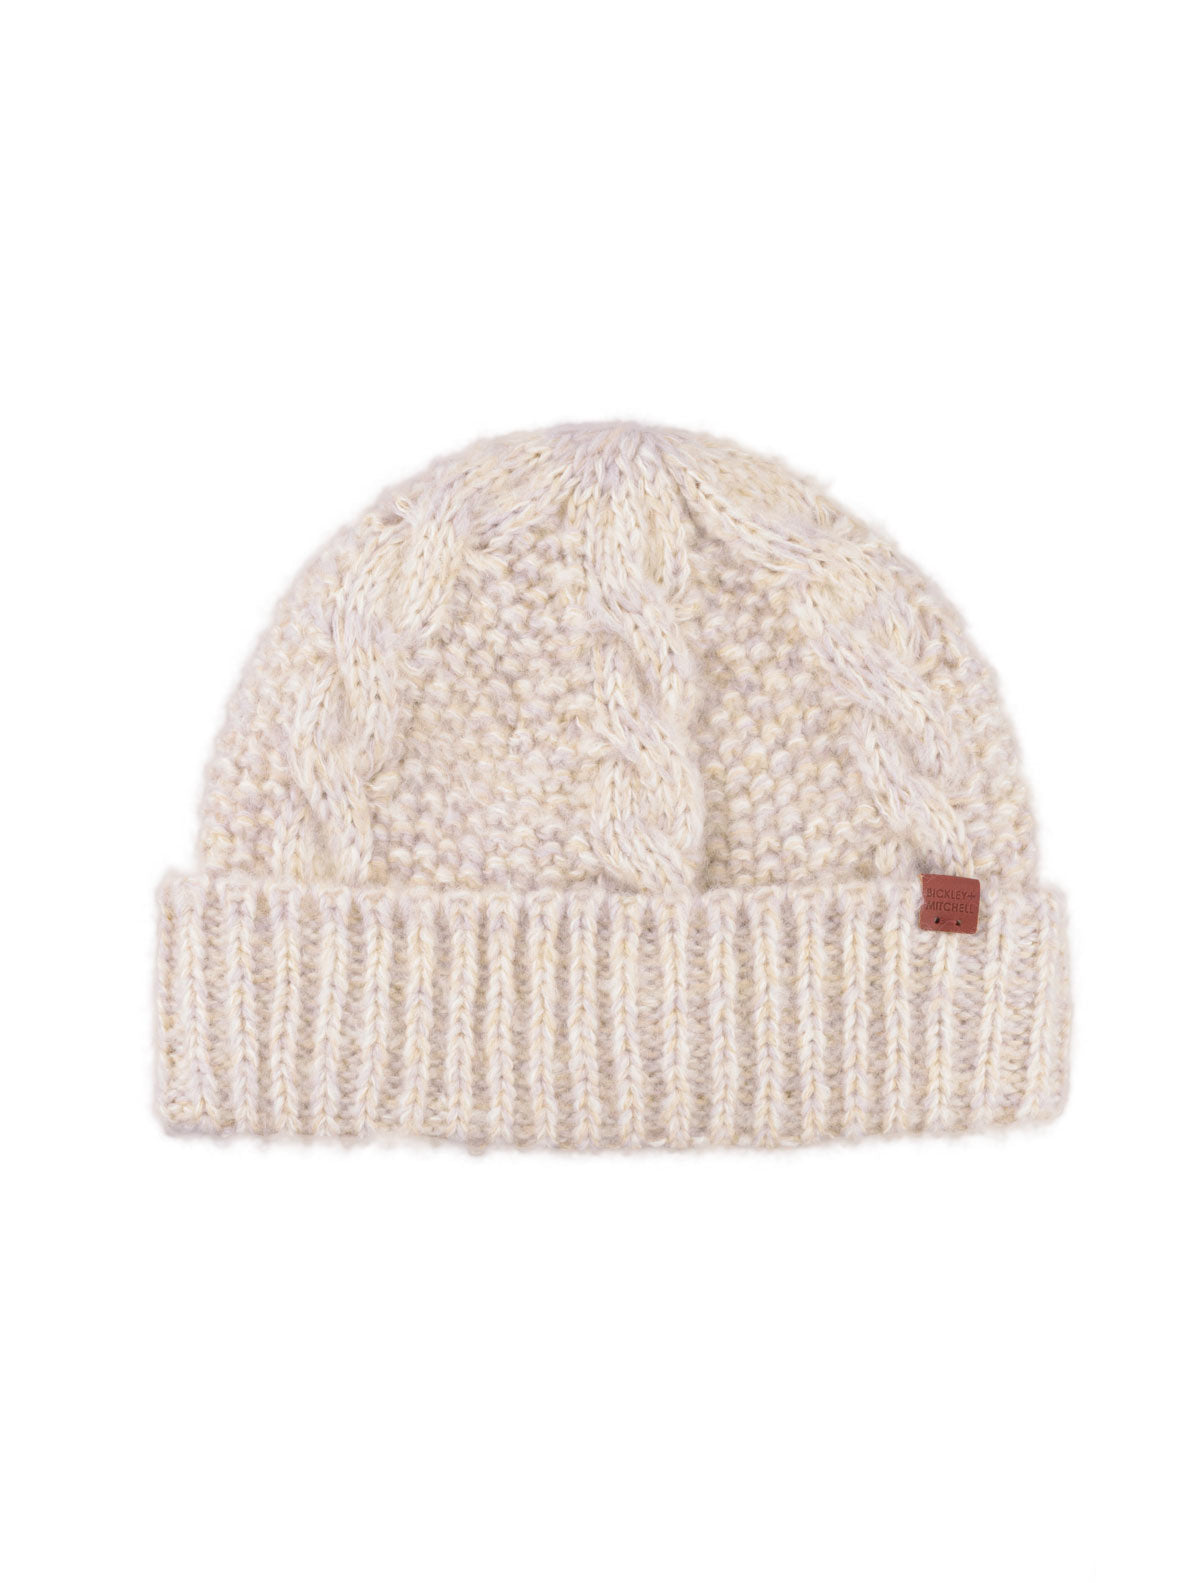 Cable knitted short model beanie